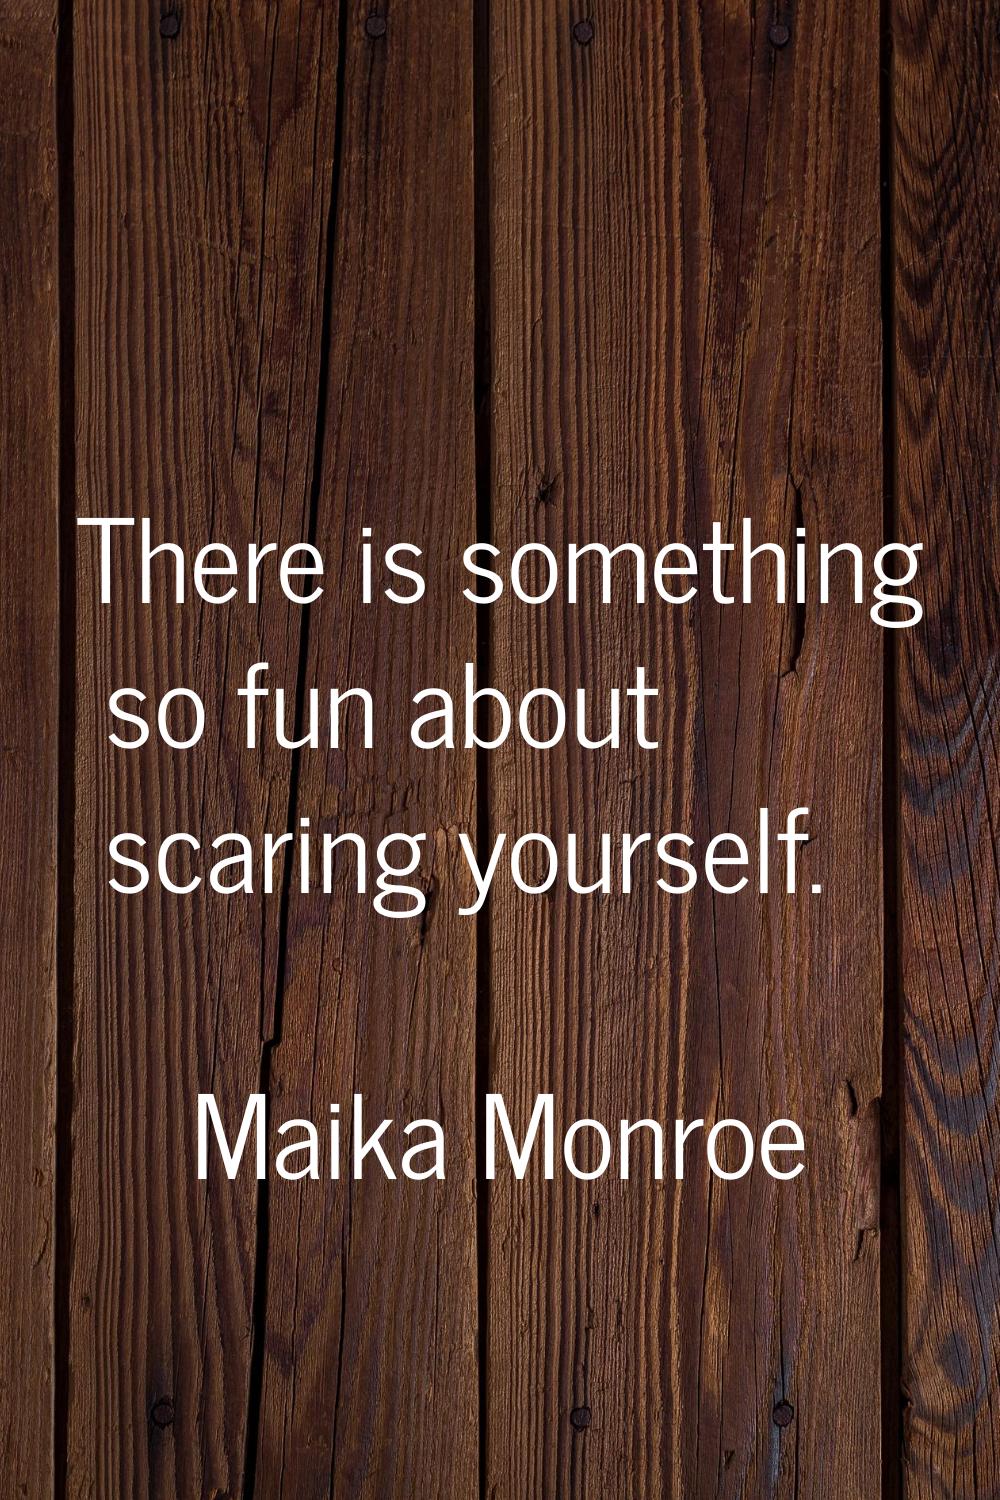 There is something so fun about scaring yourself.